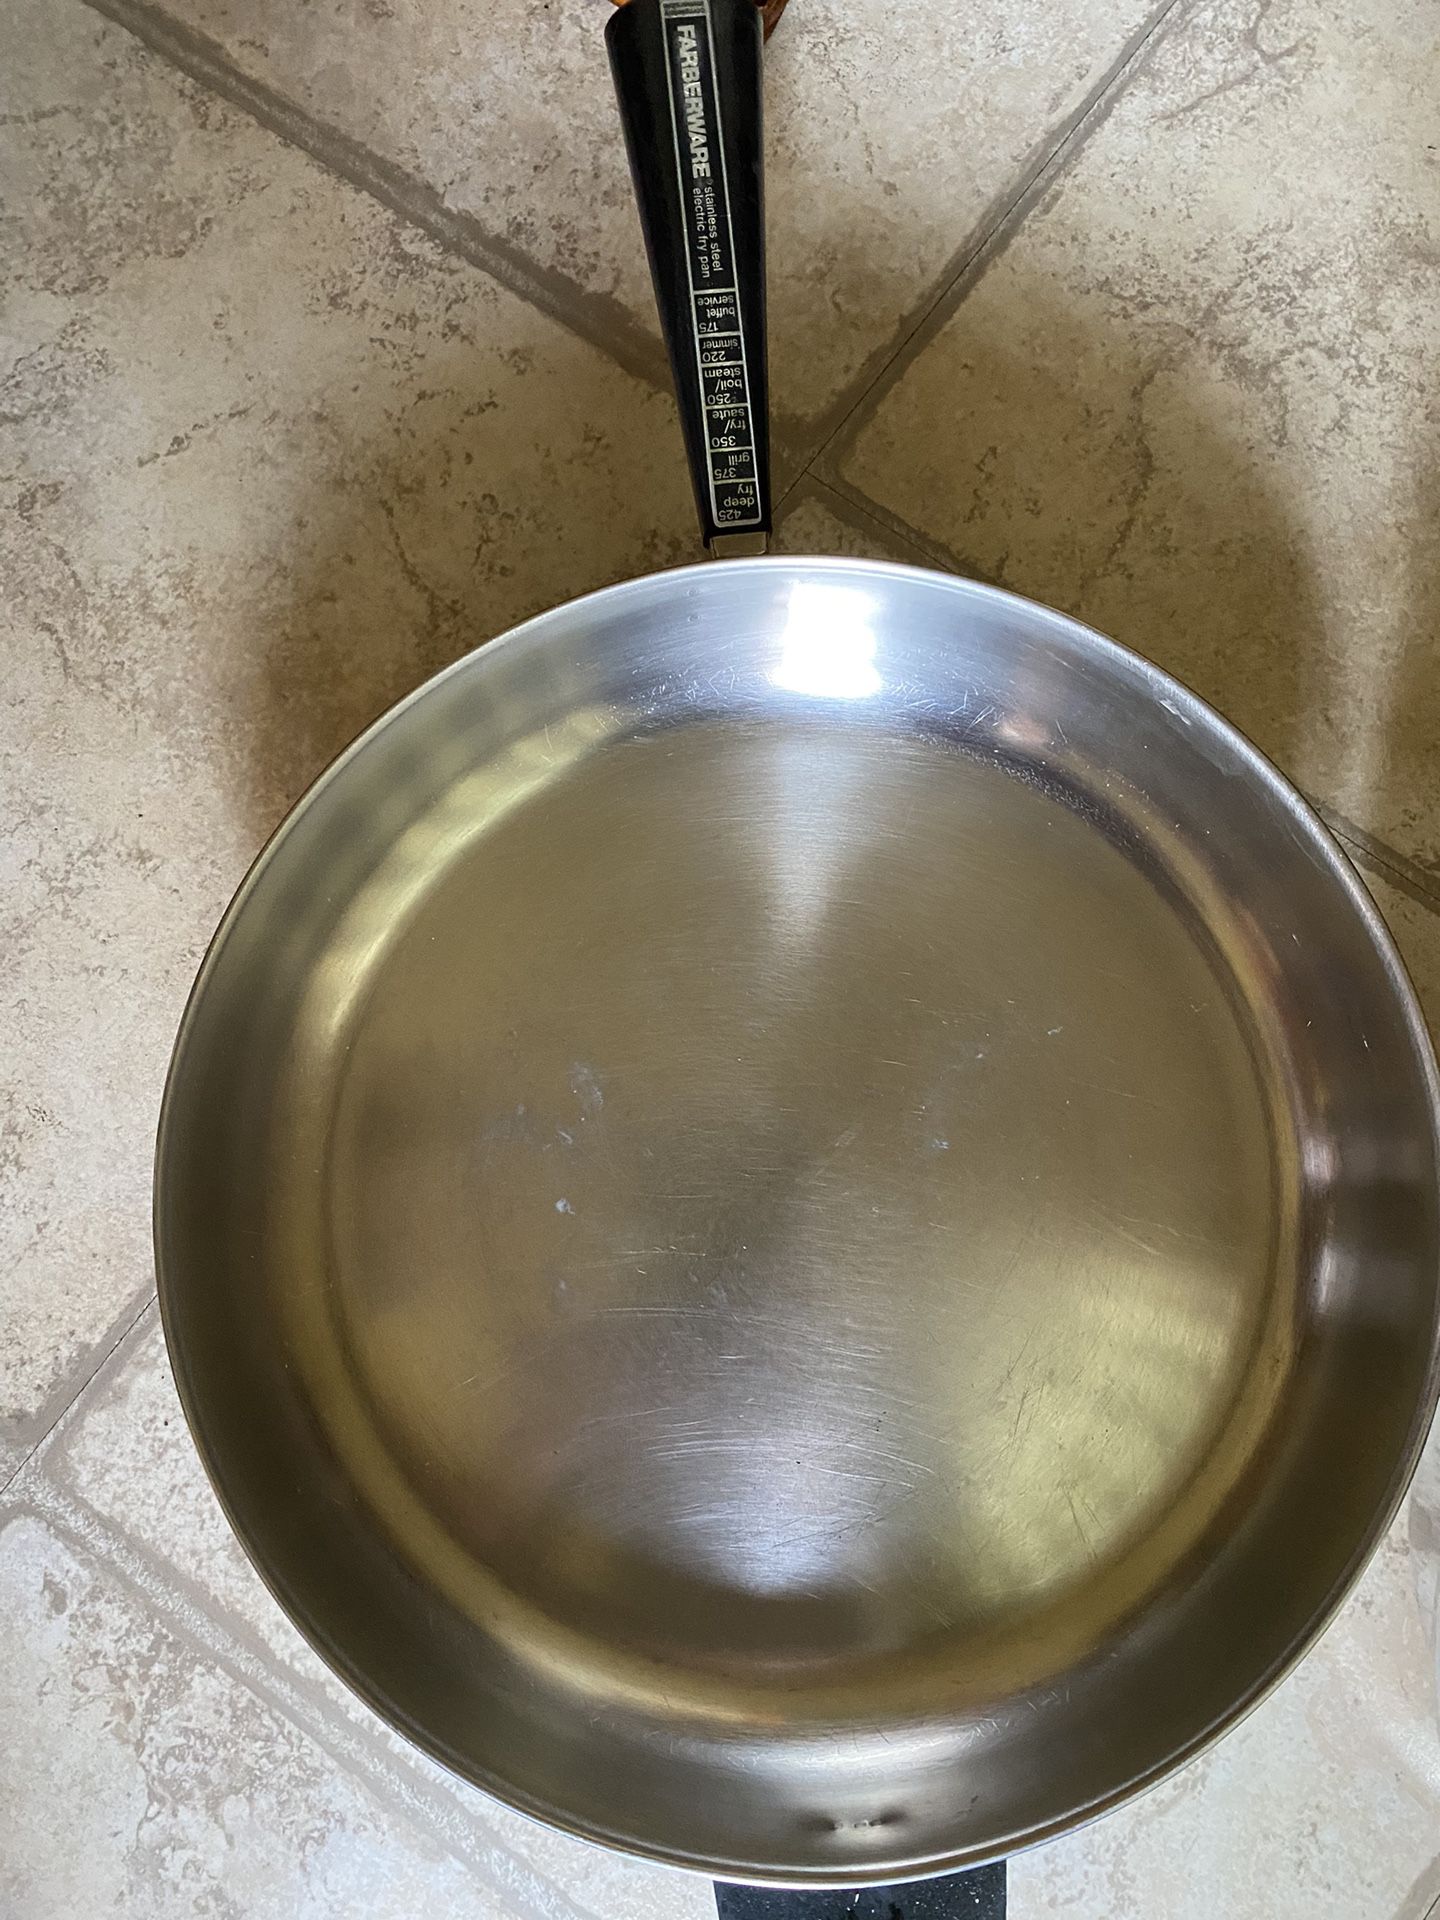 Farberware Stainless Steel Electric Fry Pan for Sale in Stockton, CA -  OfferUp